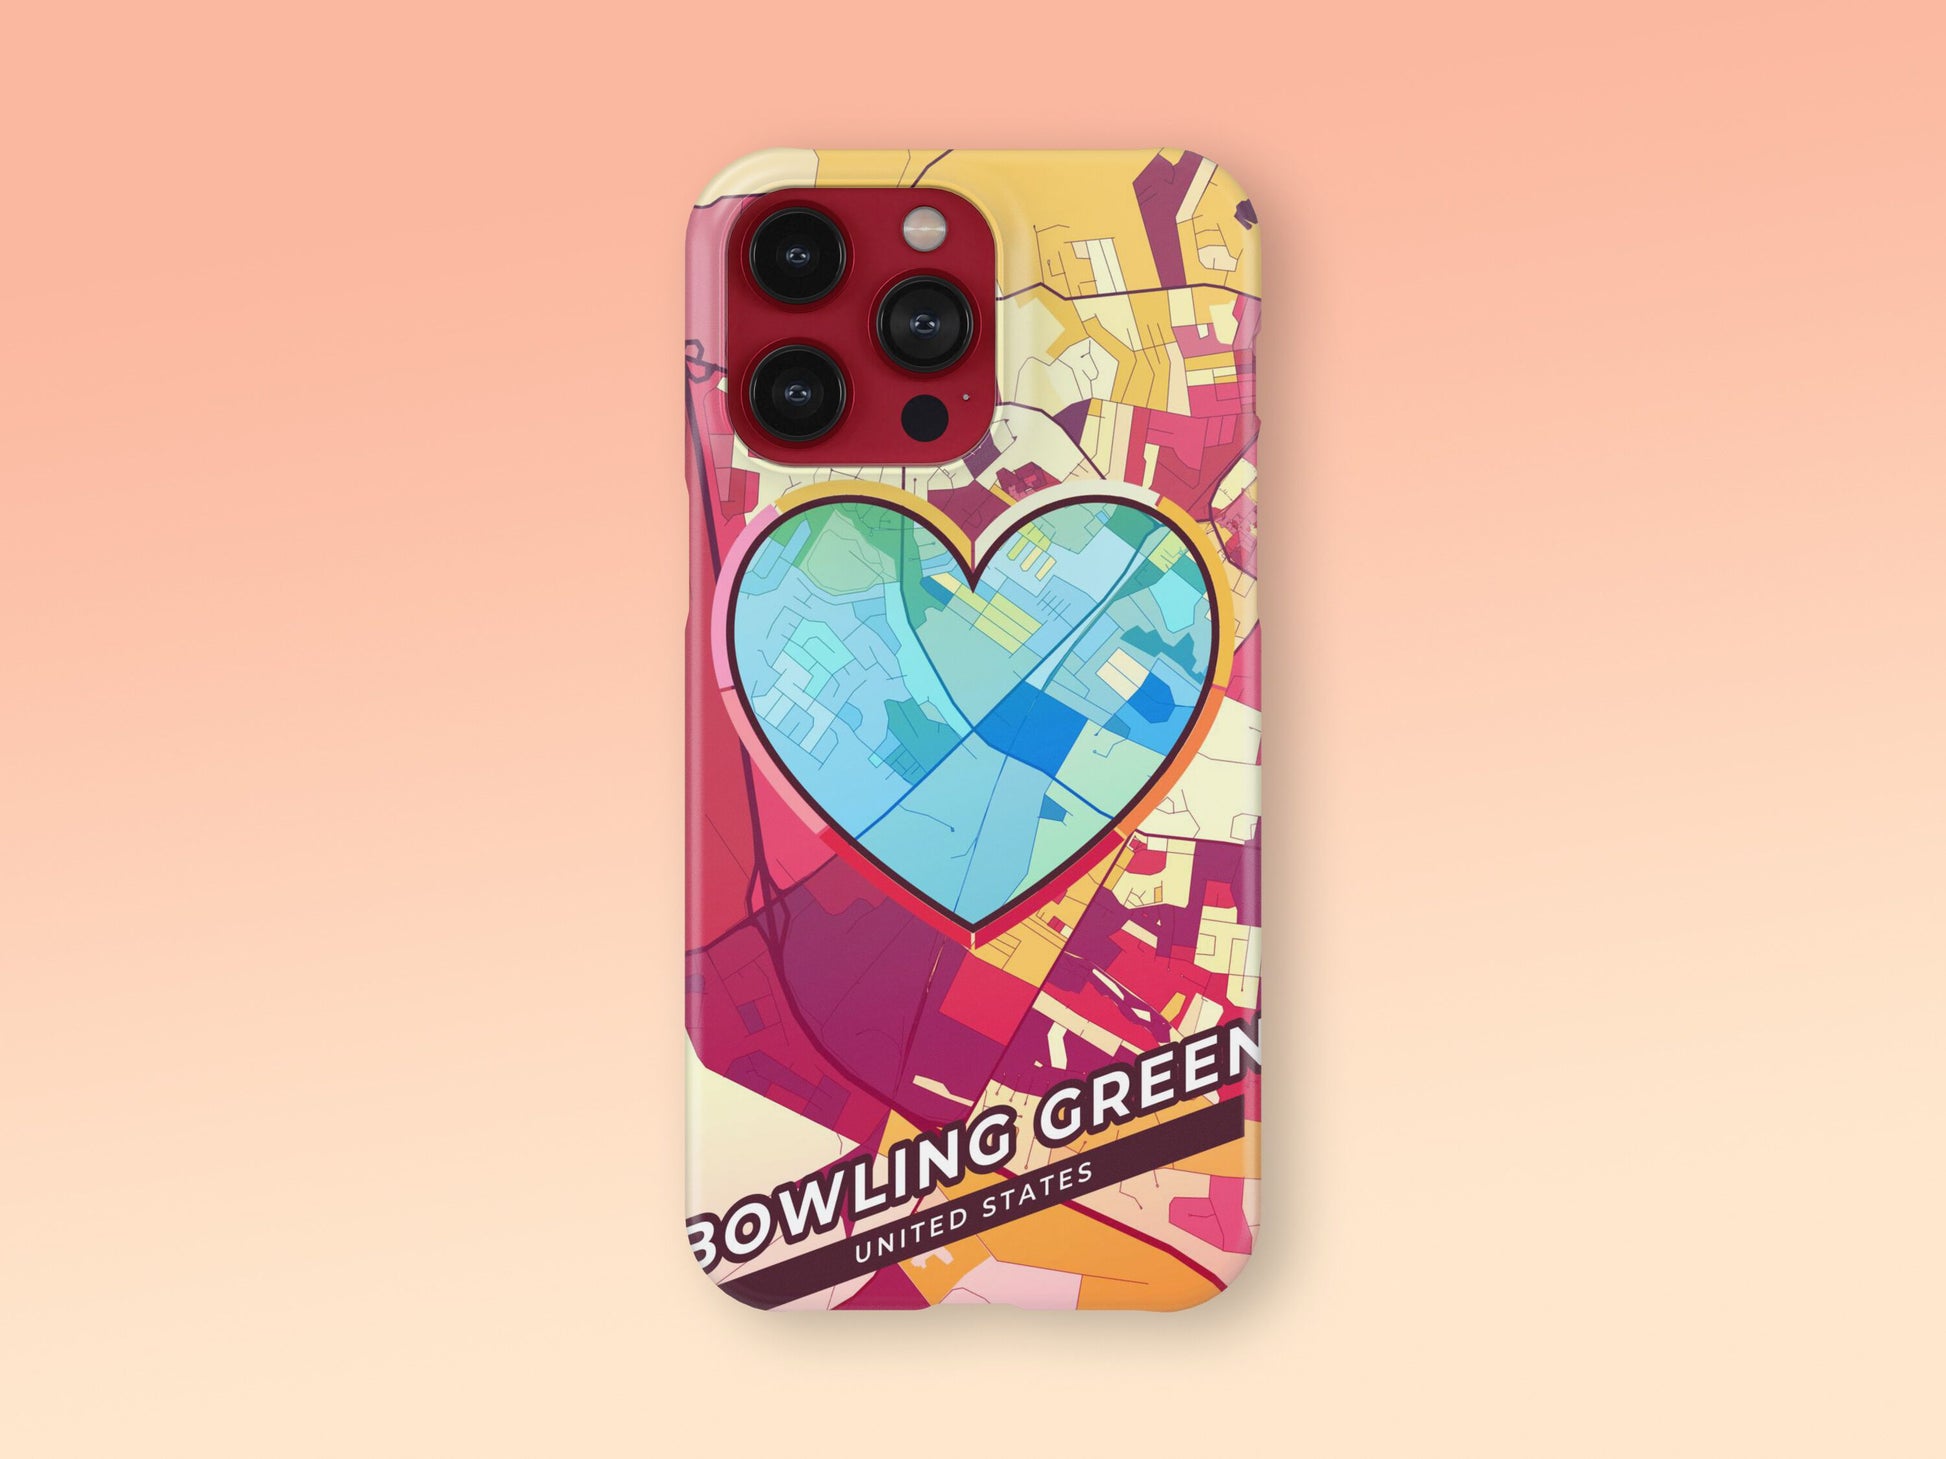 Bowling Green Kentucky slim phone case with colorful icon. Birthday, wedding or housewarming gift. Couple match cases. 2